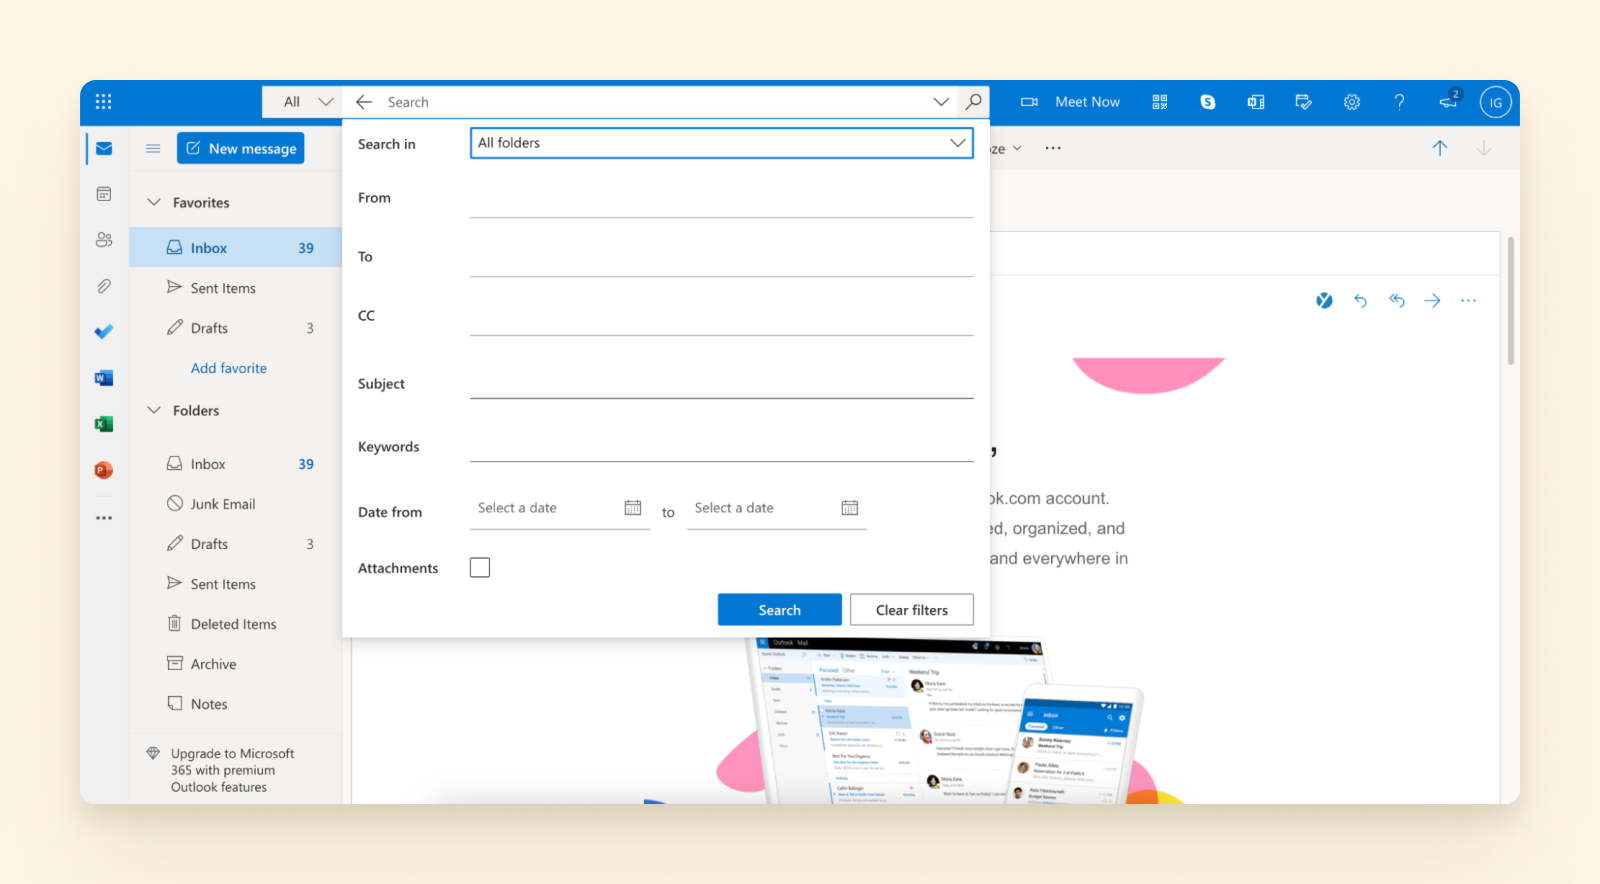 How to Filter Emails in Outlook on Both Desktop and the Web App